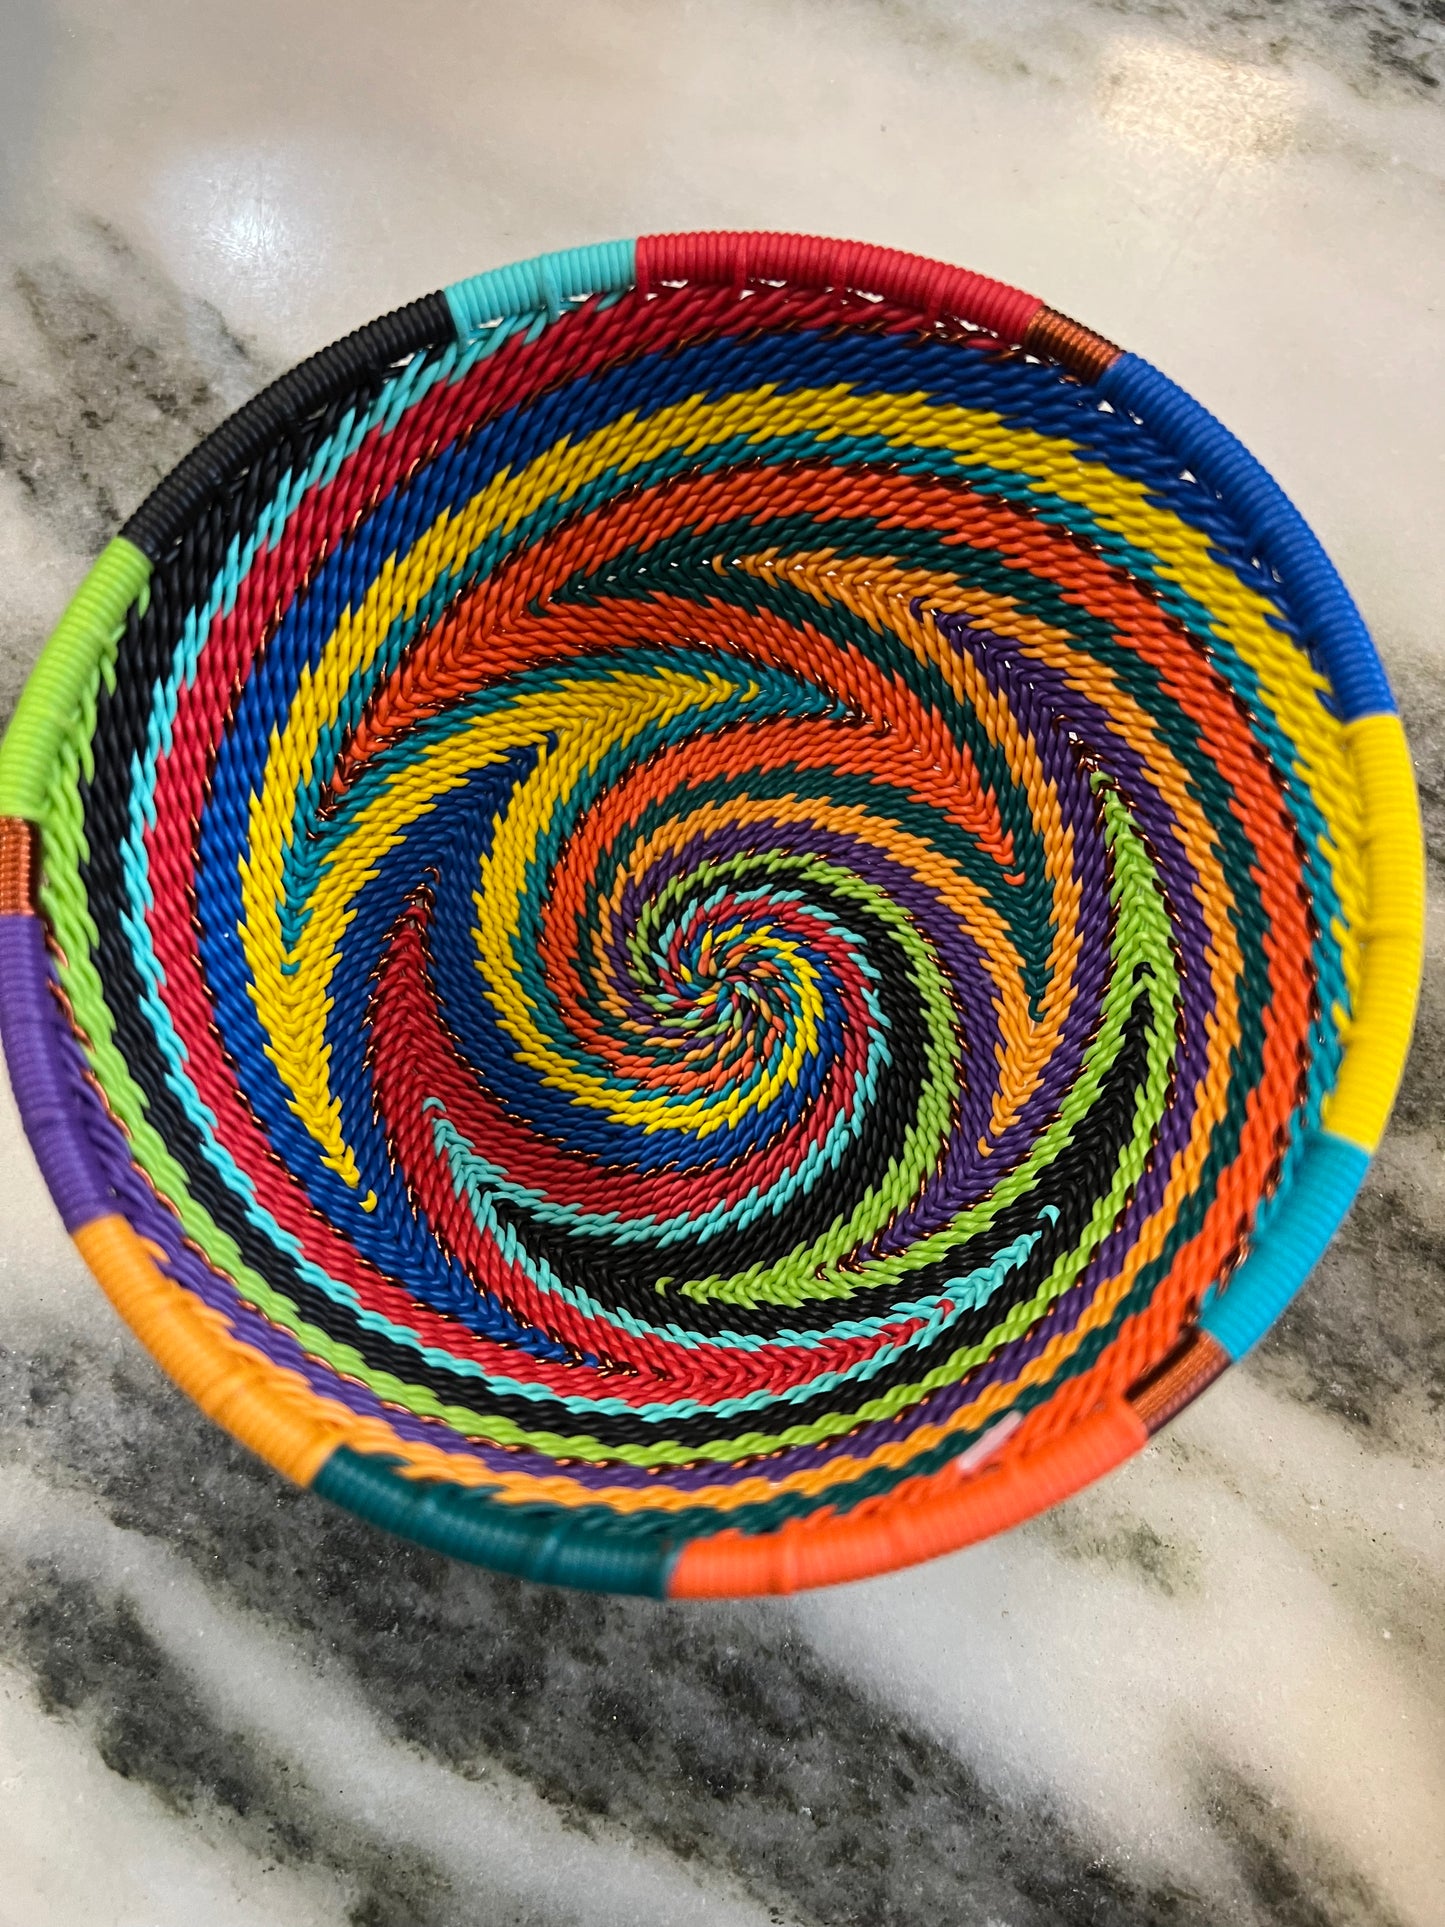 Briliantly Colorful Telephone Wire Extra Small Bowls for Extra Small Items